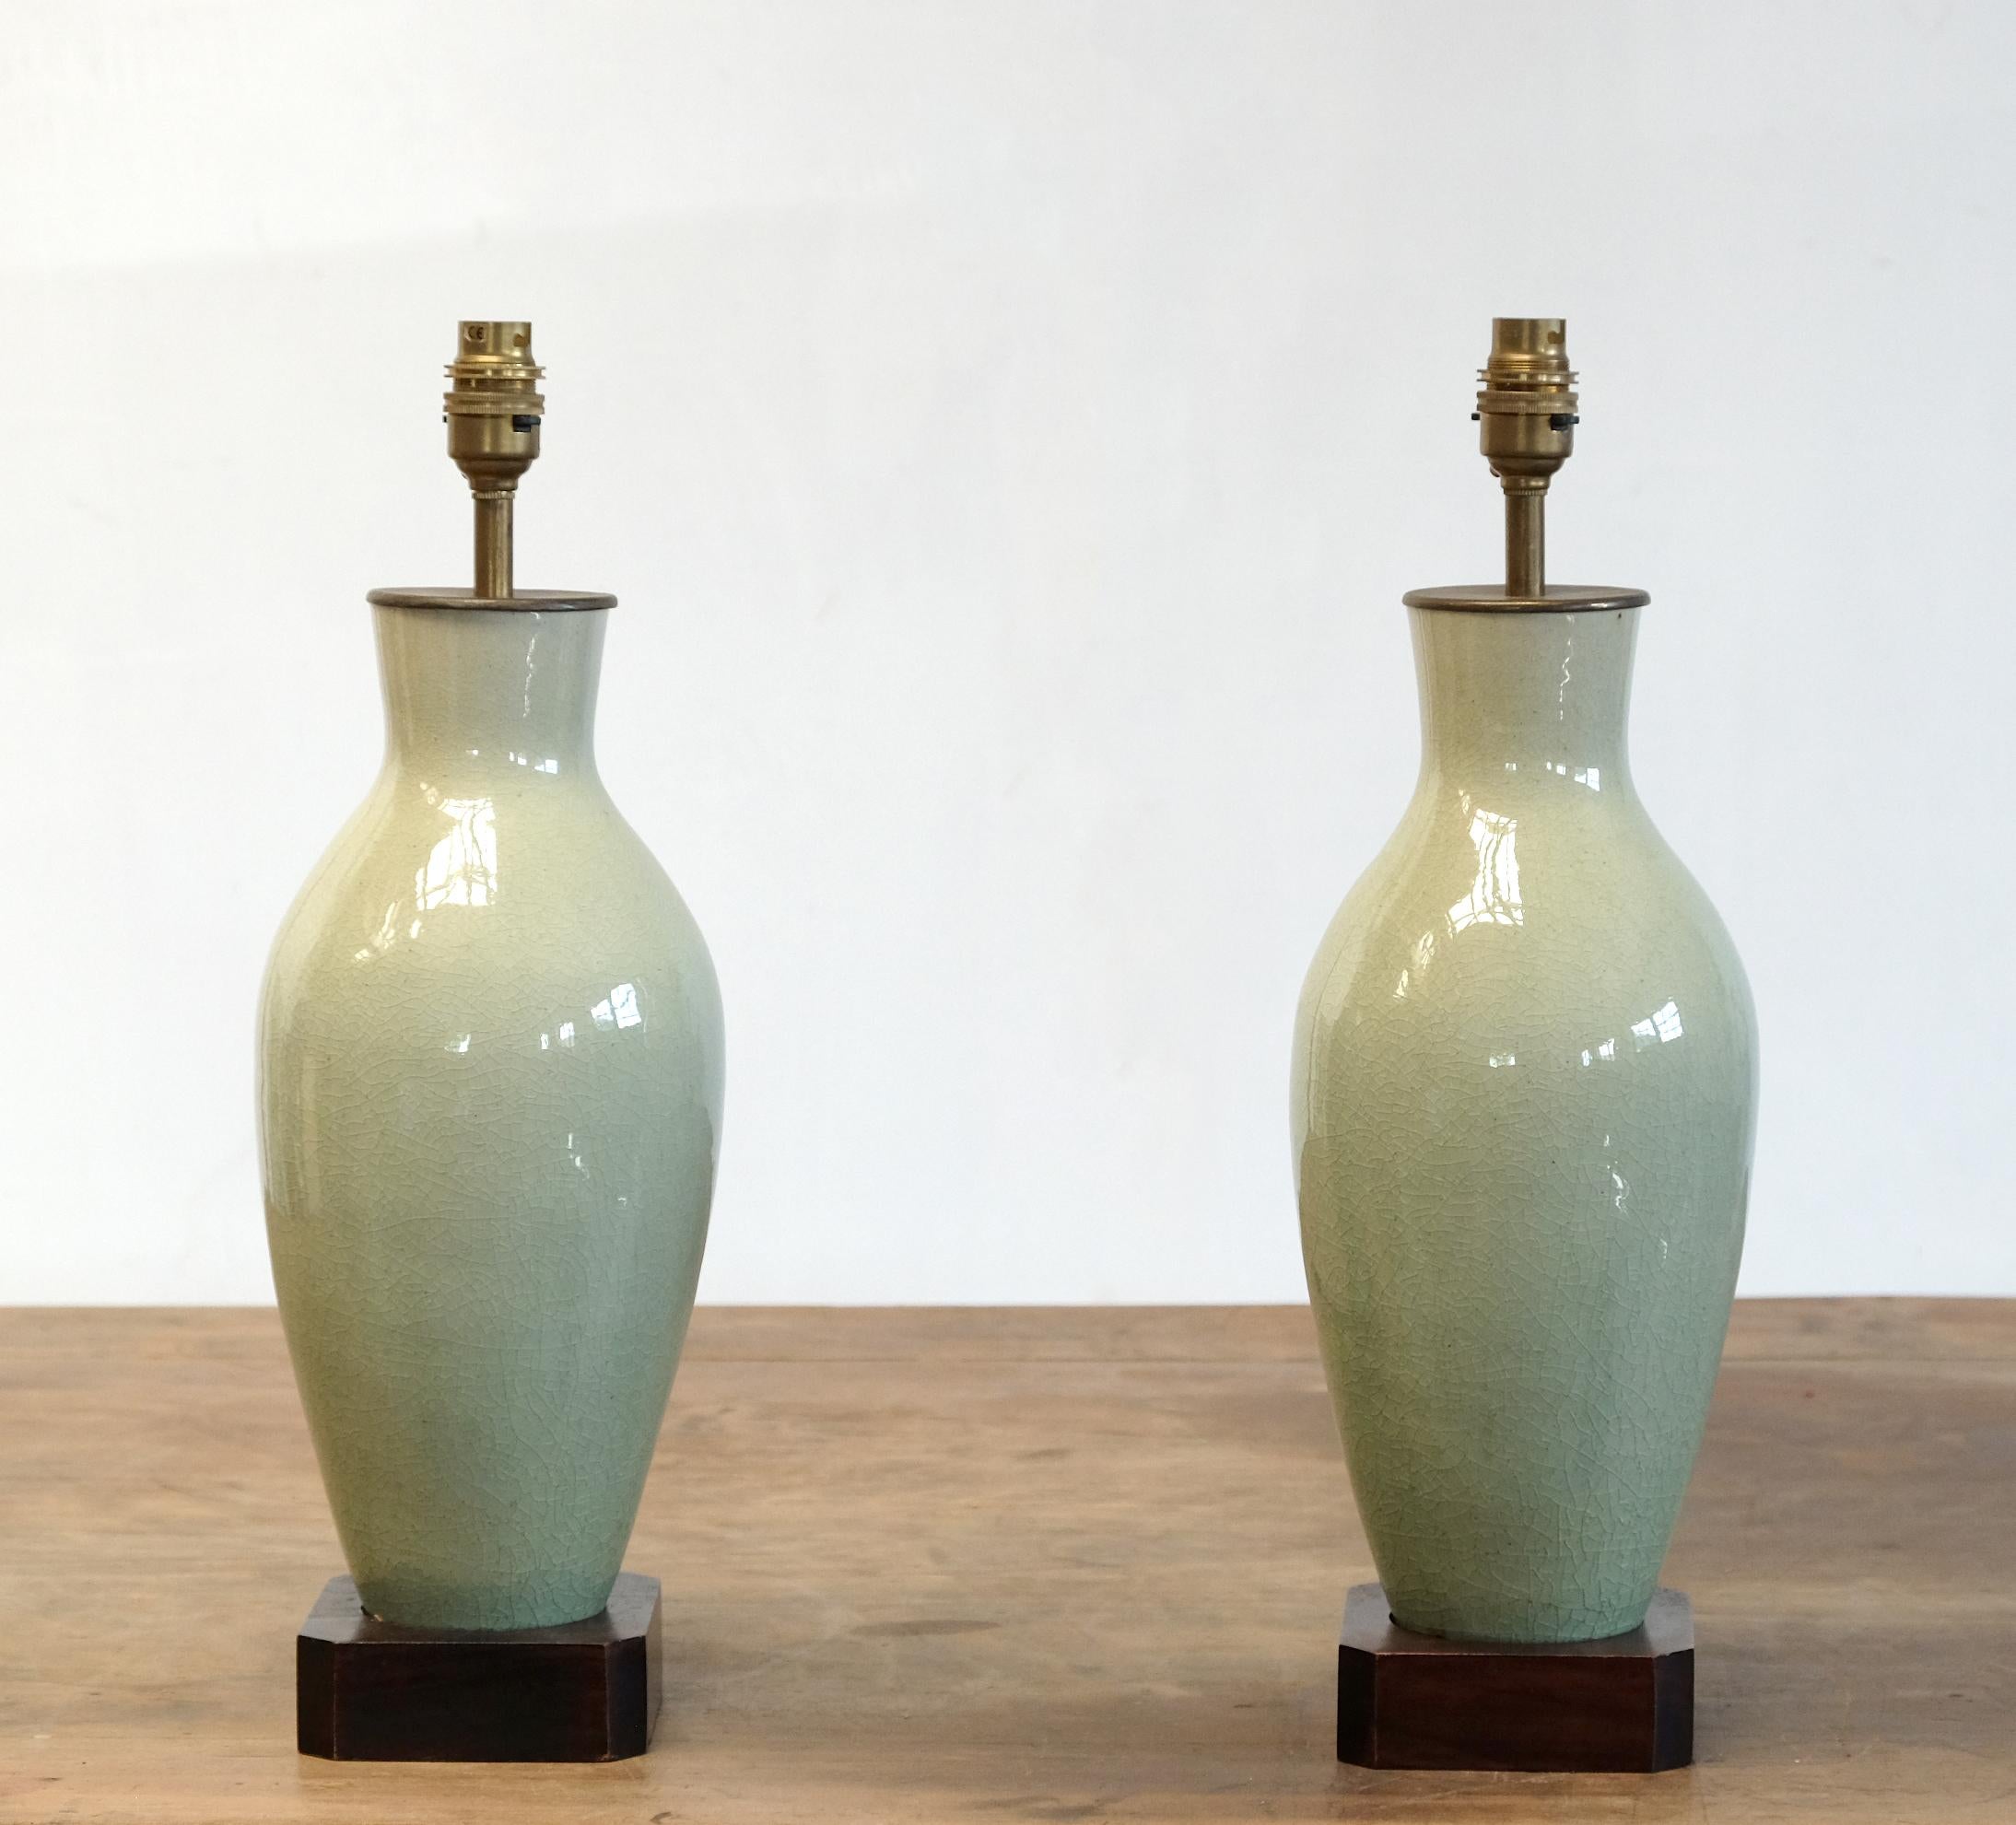 Pair of Celadon Crackle Glaze Vase Lamps, Mid-20th Century, Jade Green, Chinese 1